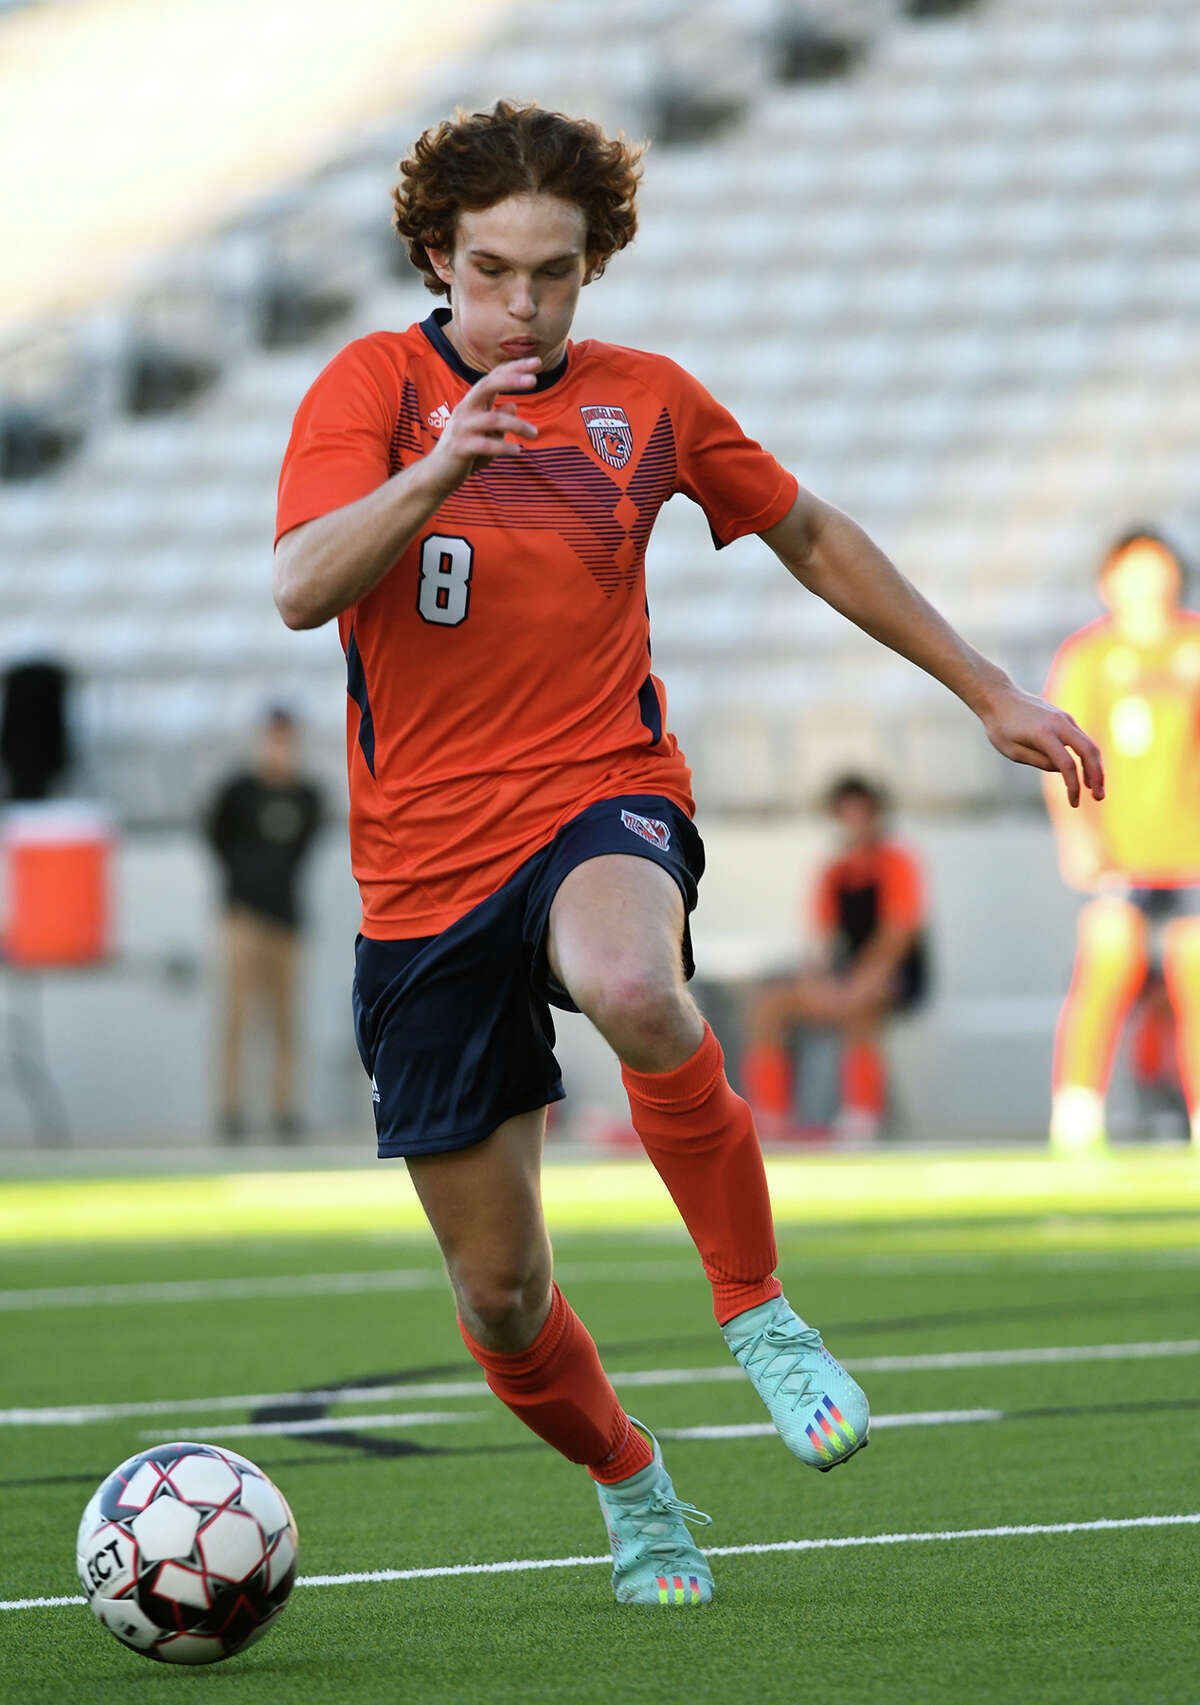 Bridgeland's Brantley Hollis works the ball against the Valley View defense during the second half of their matchup in the 2023 CFISD Soccer Showcase at CFFCU Stadium in Cypress on Friday, Jan. 6, 2023.